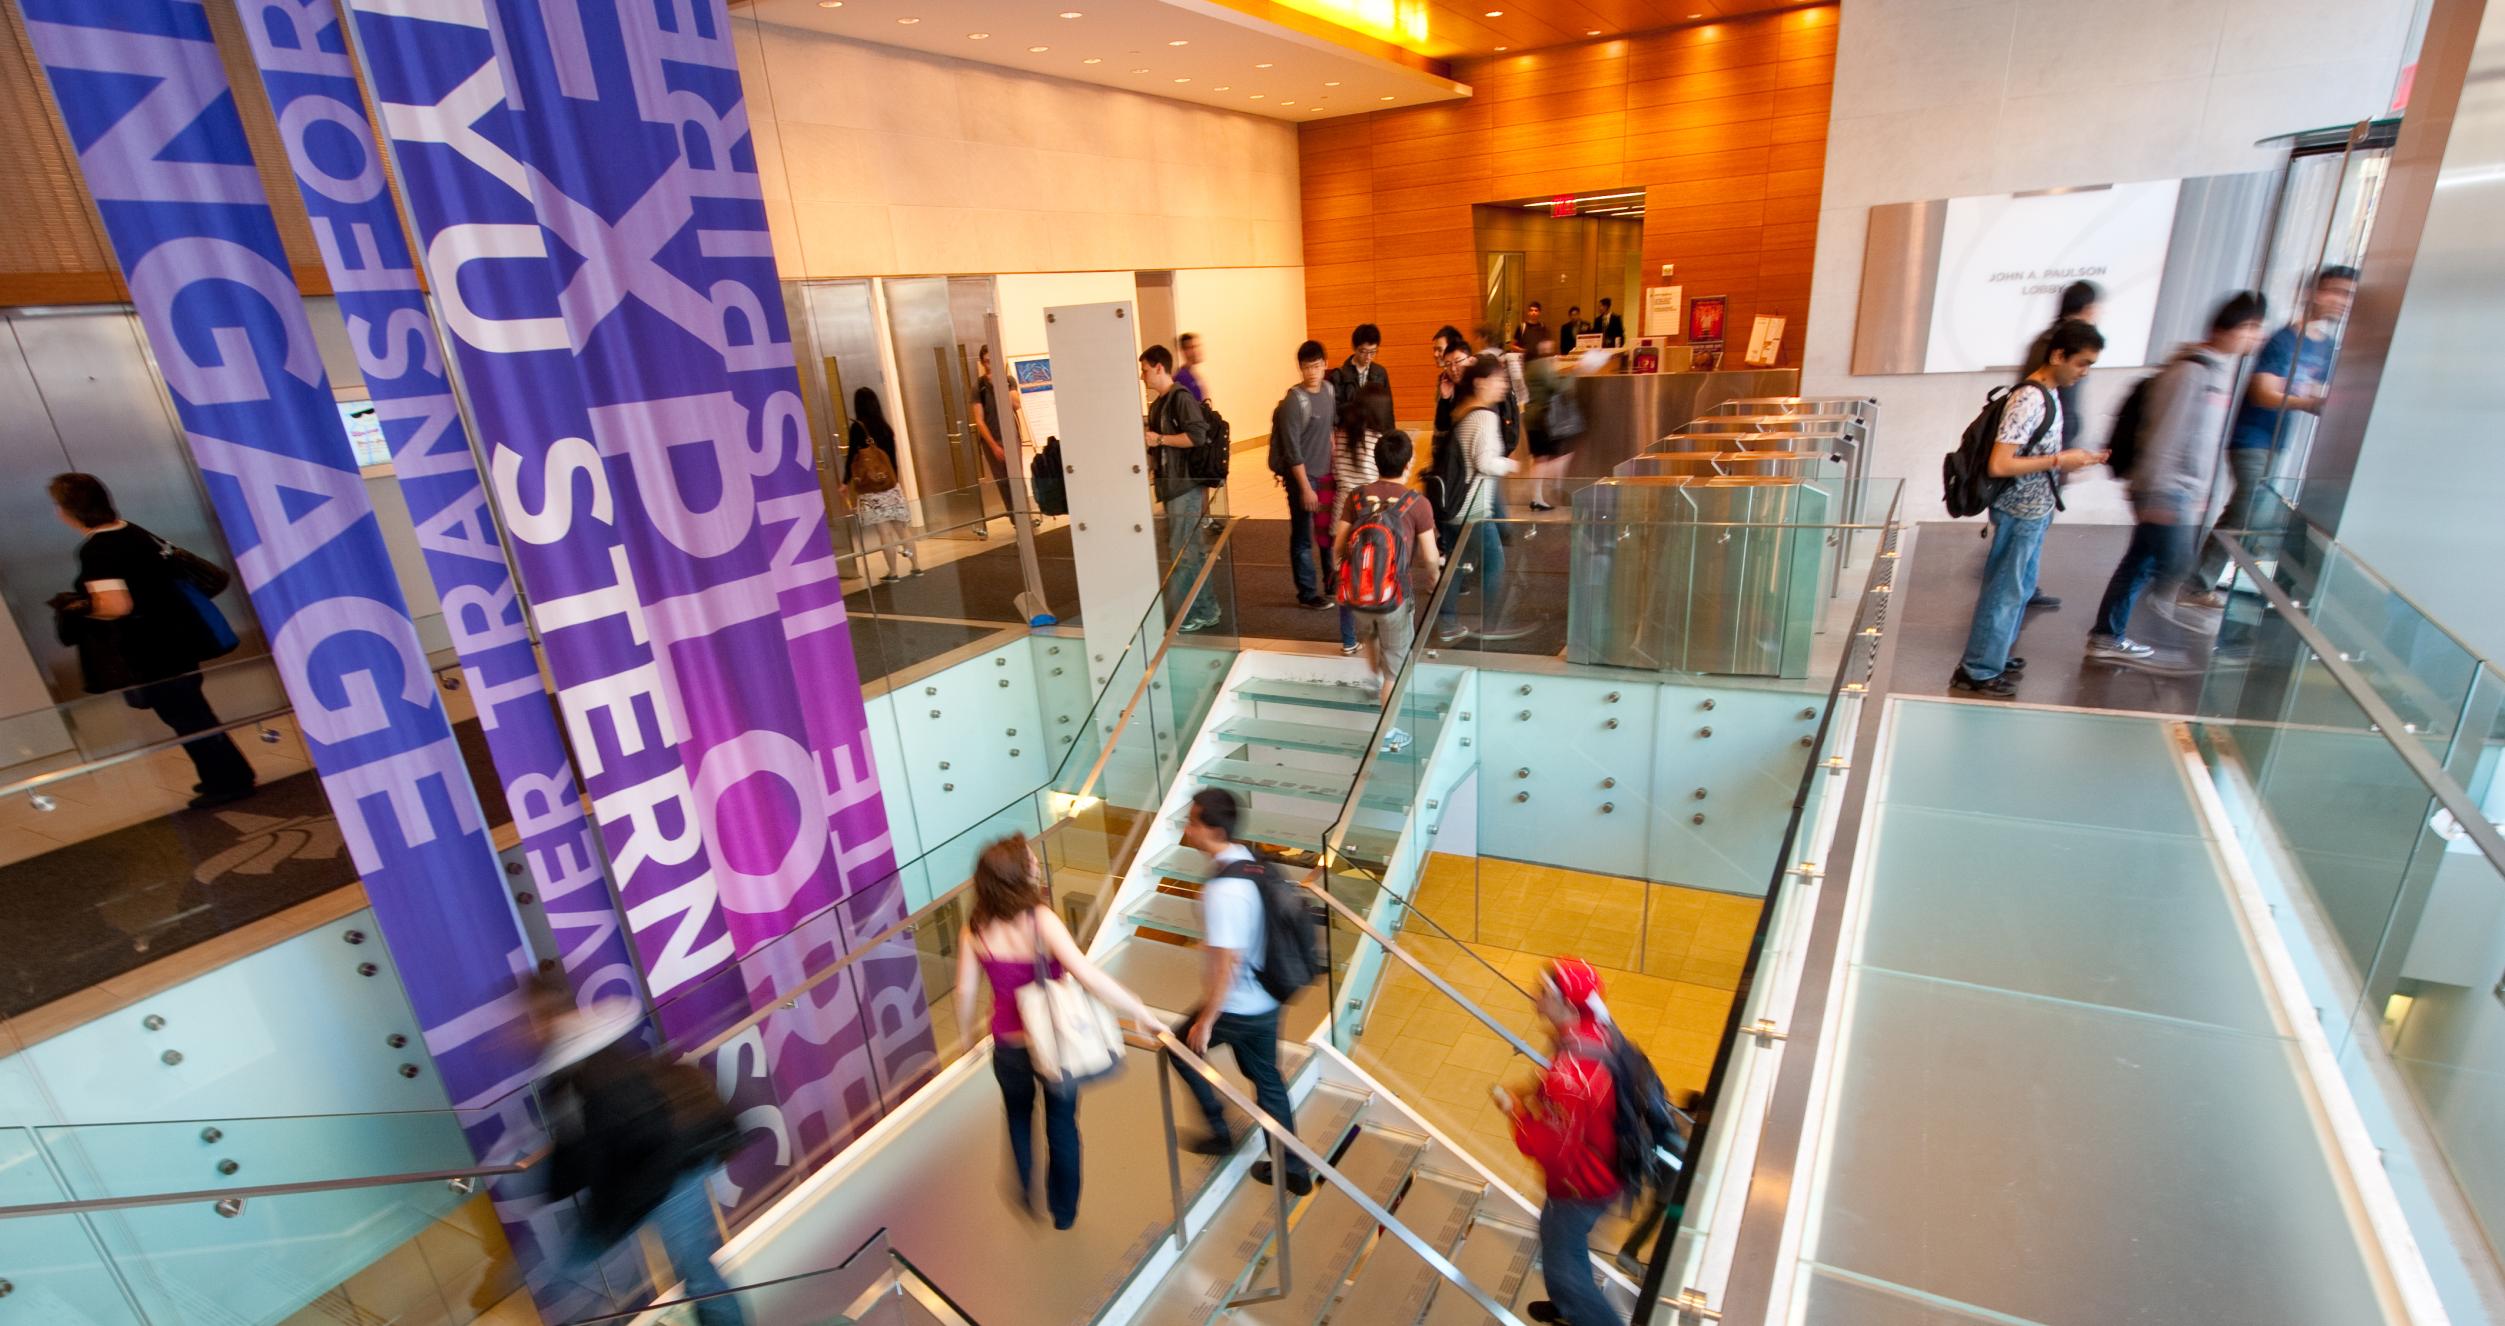 Students walking up the stairs in NYU Stern's Tisch Lobby